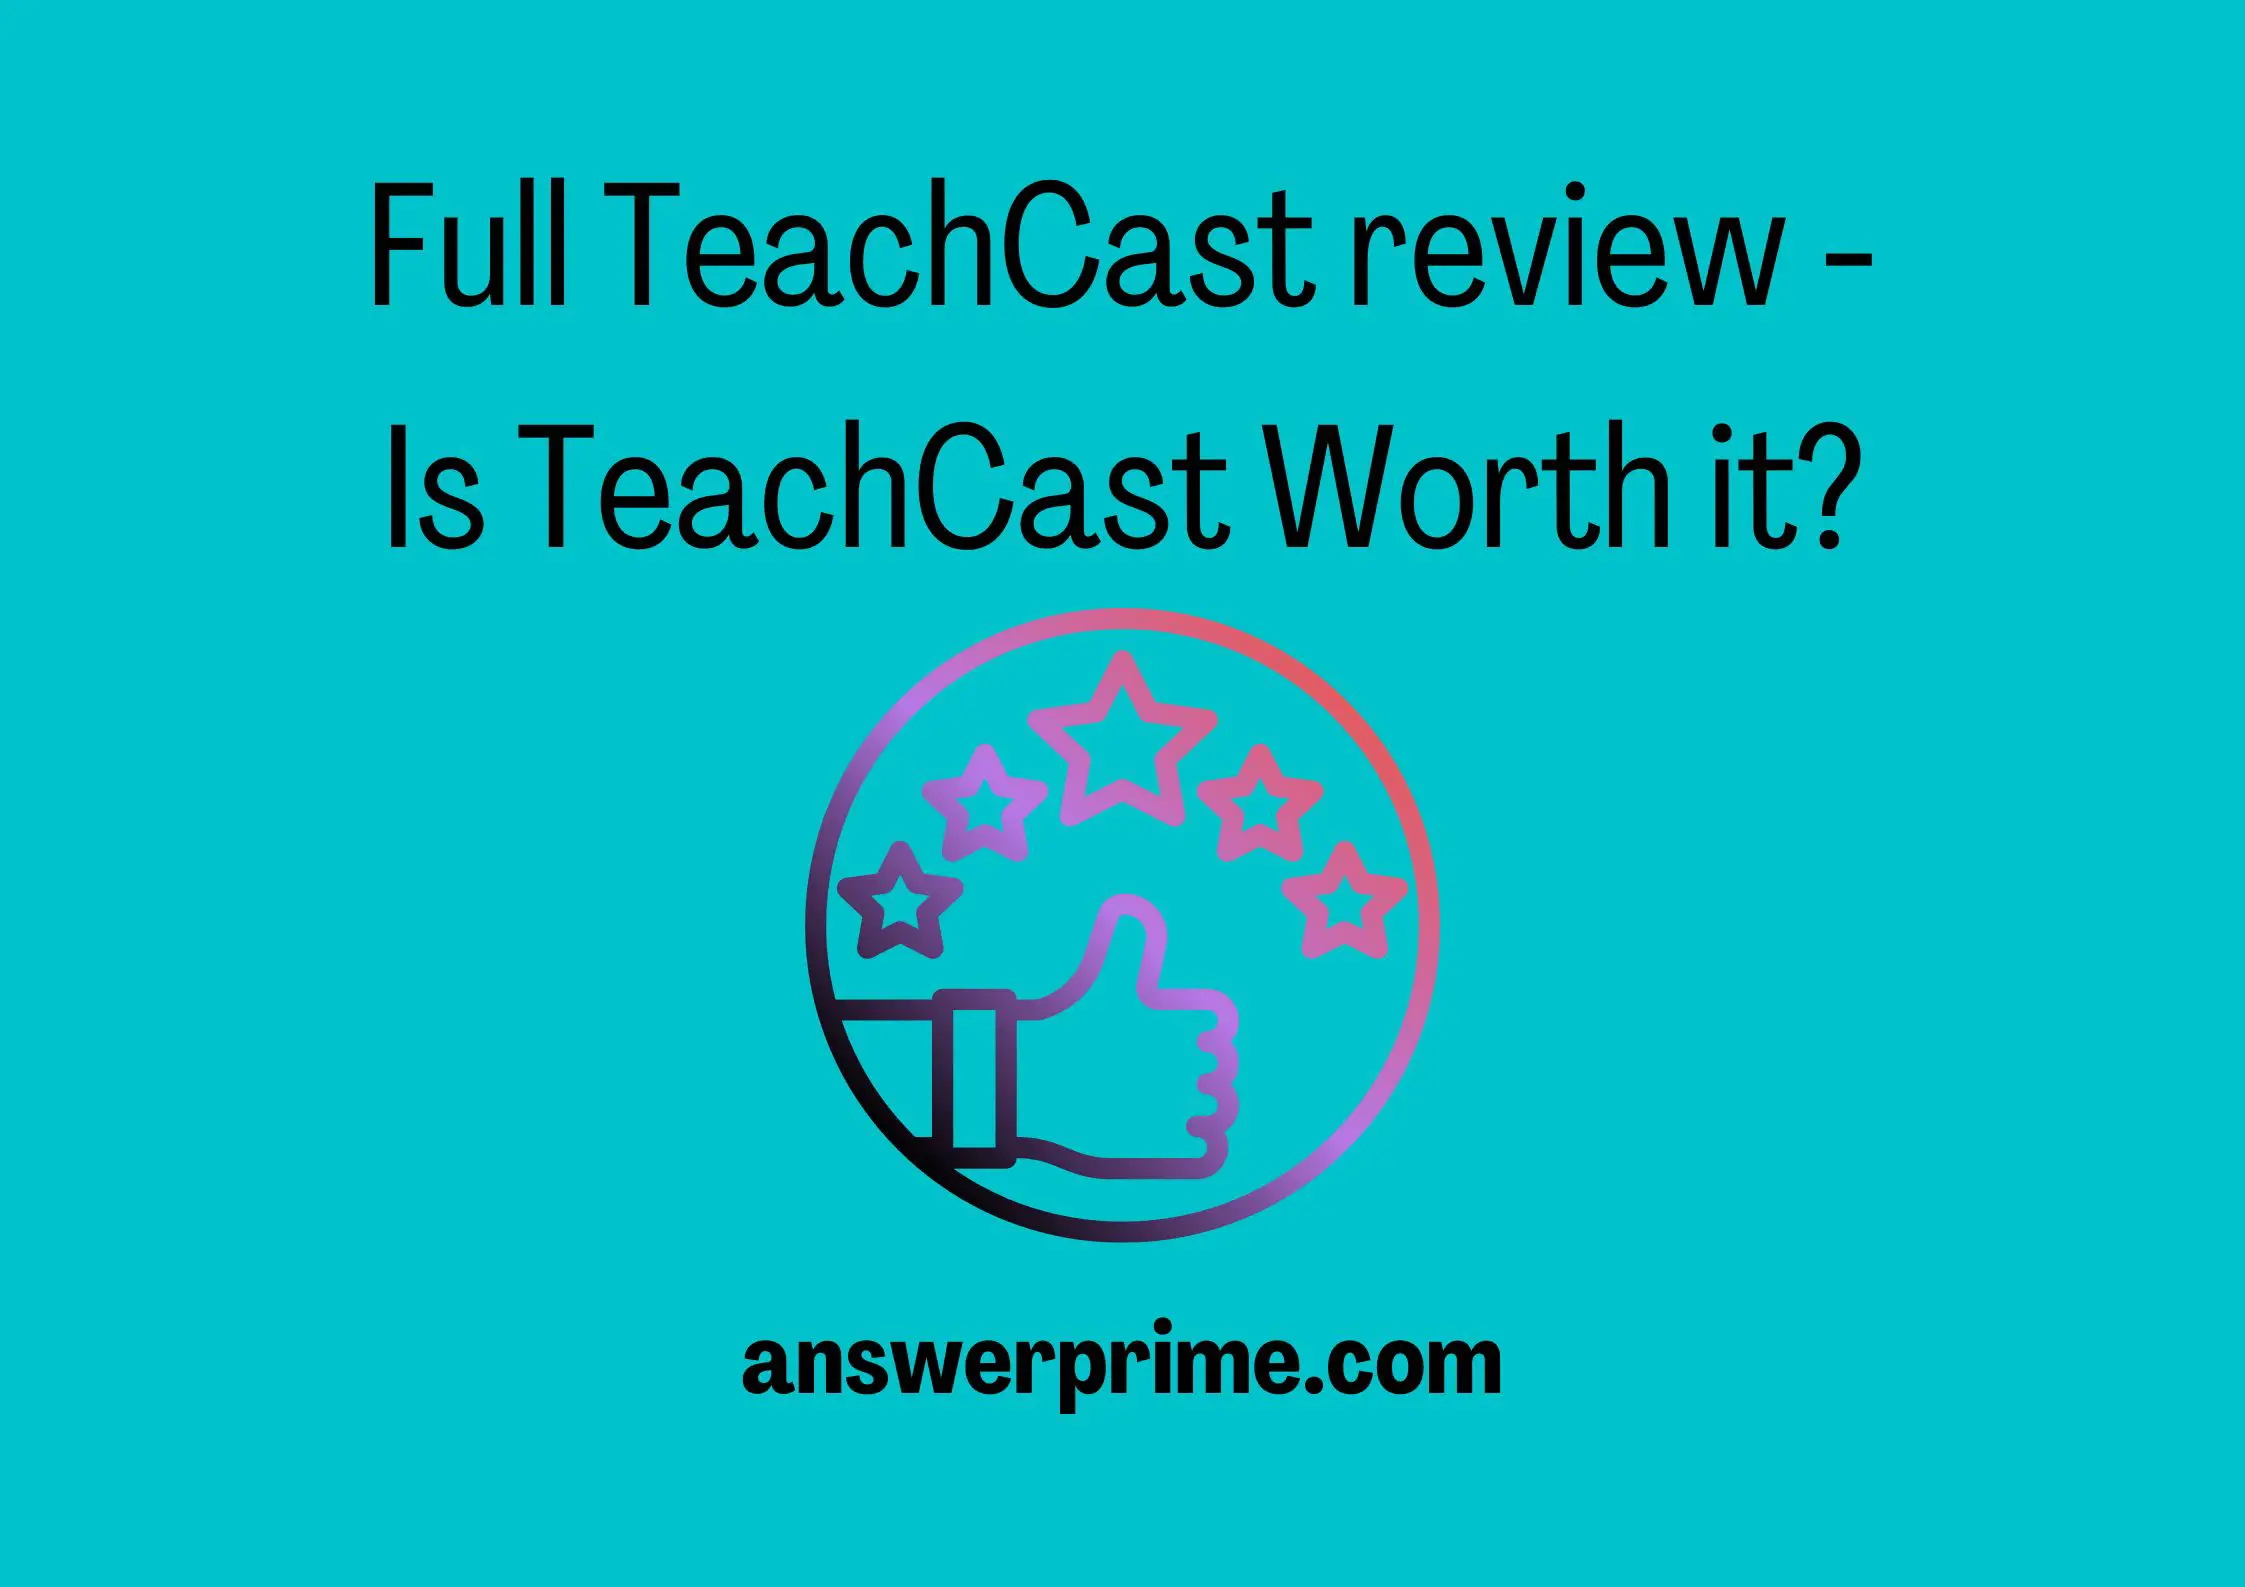 Full teachCast review - Is teachCast Worth it?